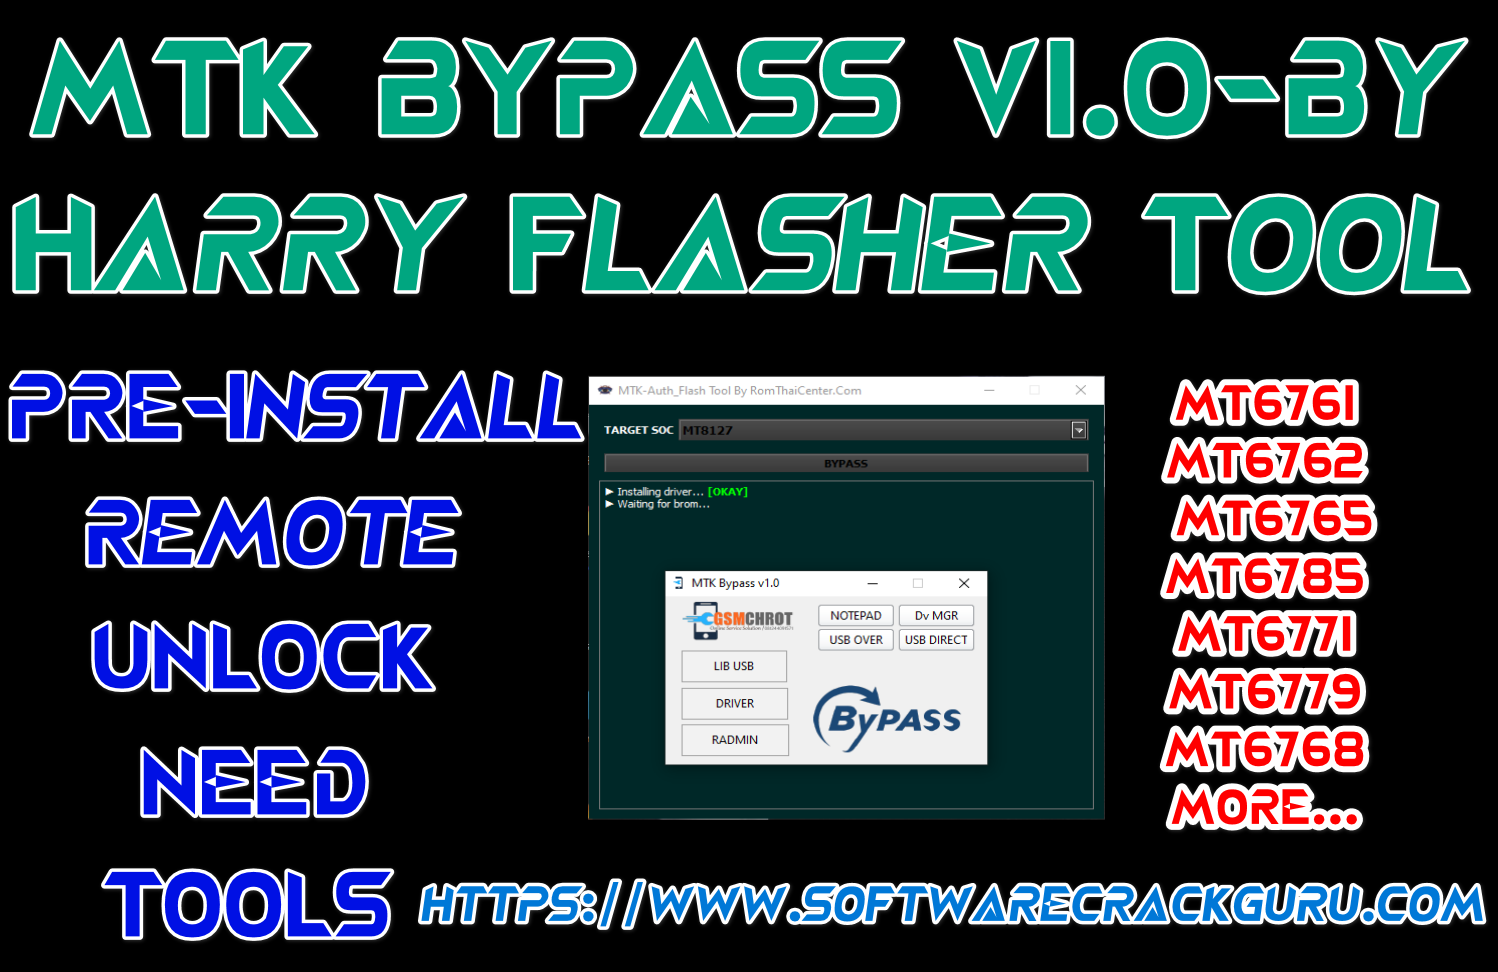 MTK auth Bypass Tool. MTK GSM Sulteng icon. Qesr MTK. Flash ROM. Auth tool